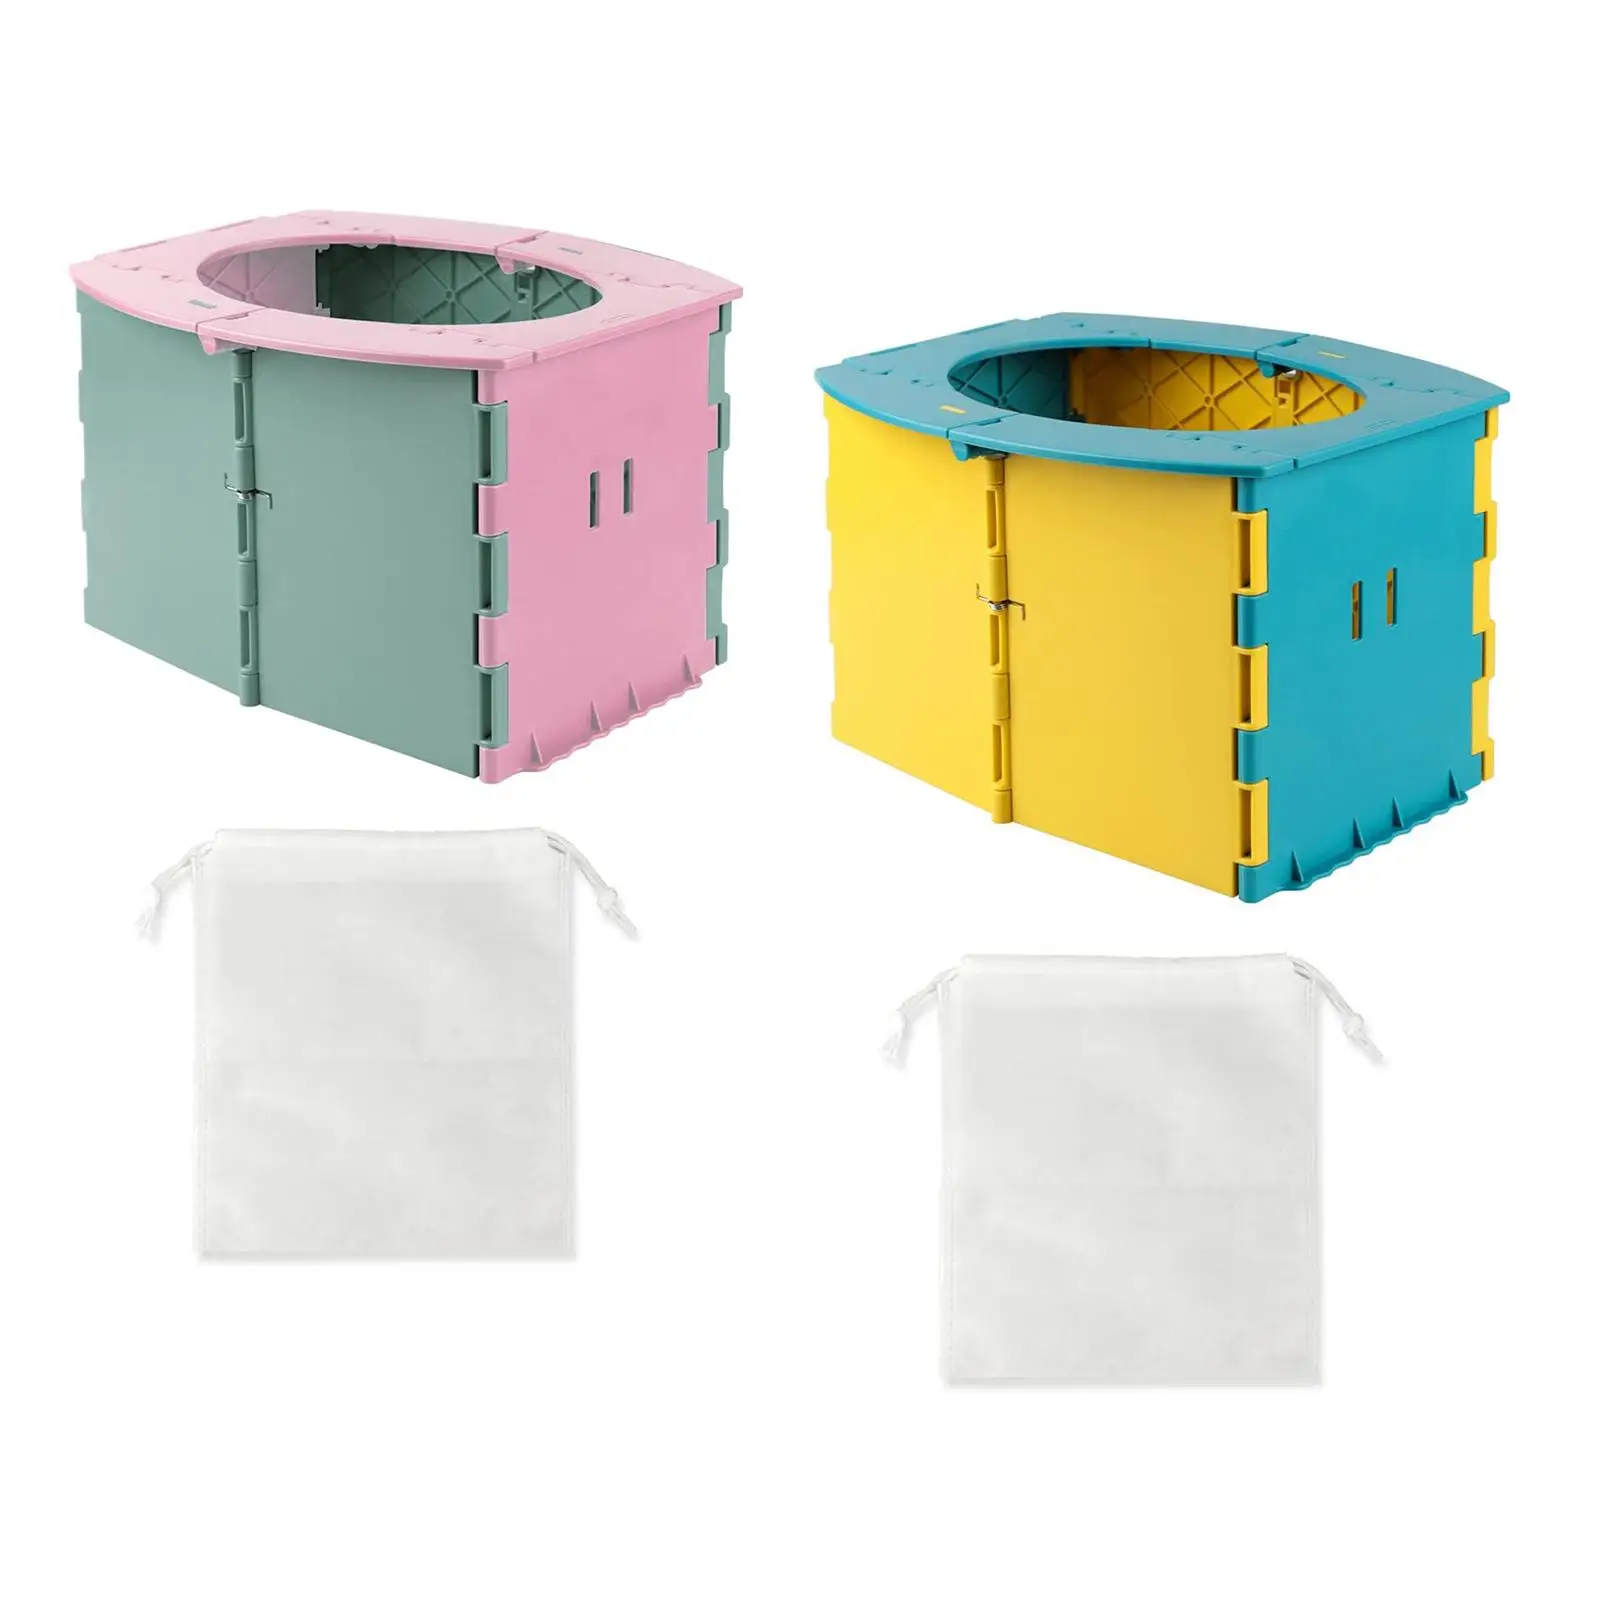 Portable Folding Toilet Bucket Toilet with Replacement Bags Travel Toilet Camping Toilet for Boat Trip Emergency Hiking Tent